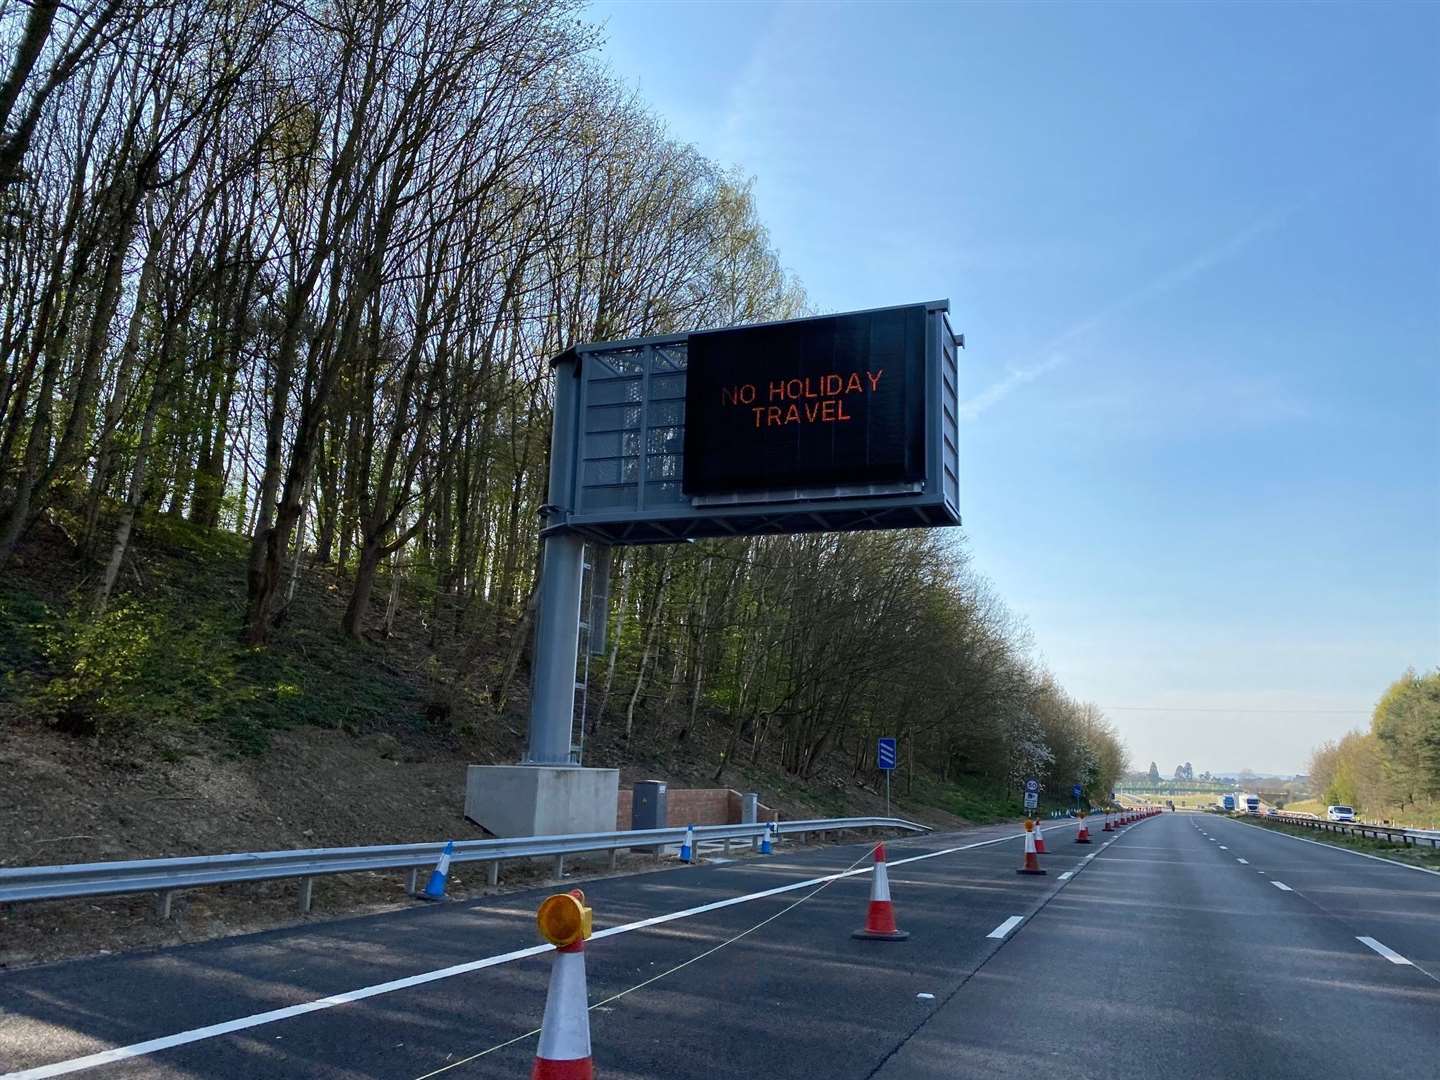 A warning to motorists on the M20 as Easter approaches.